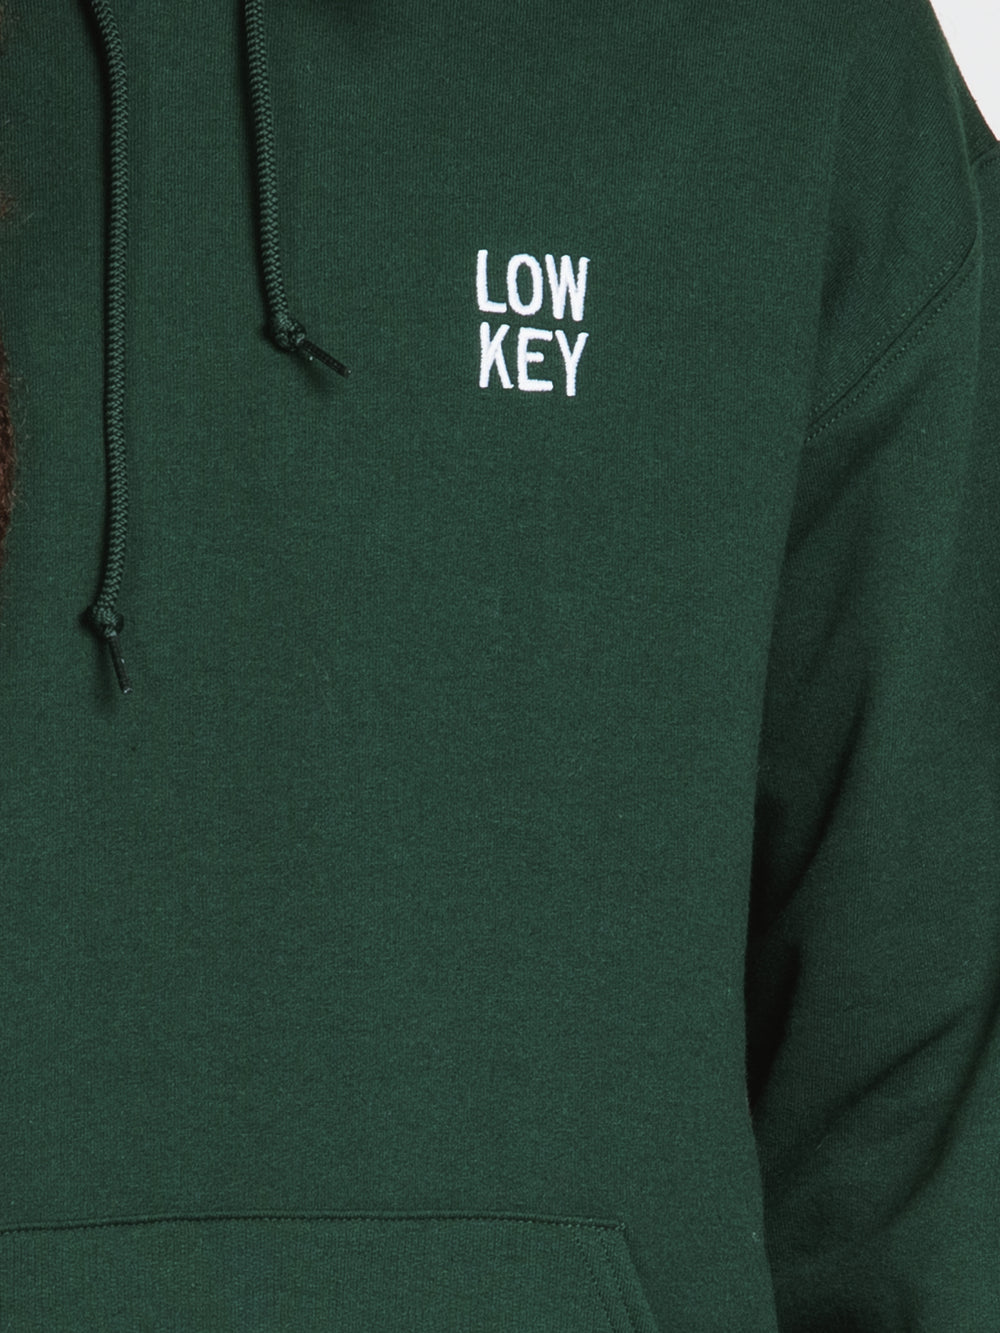 LOW KEY EMBROIDERED HOODIE